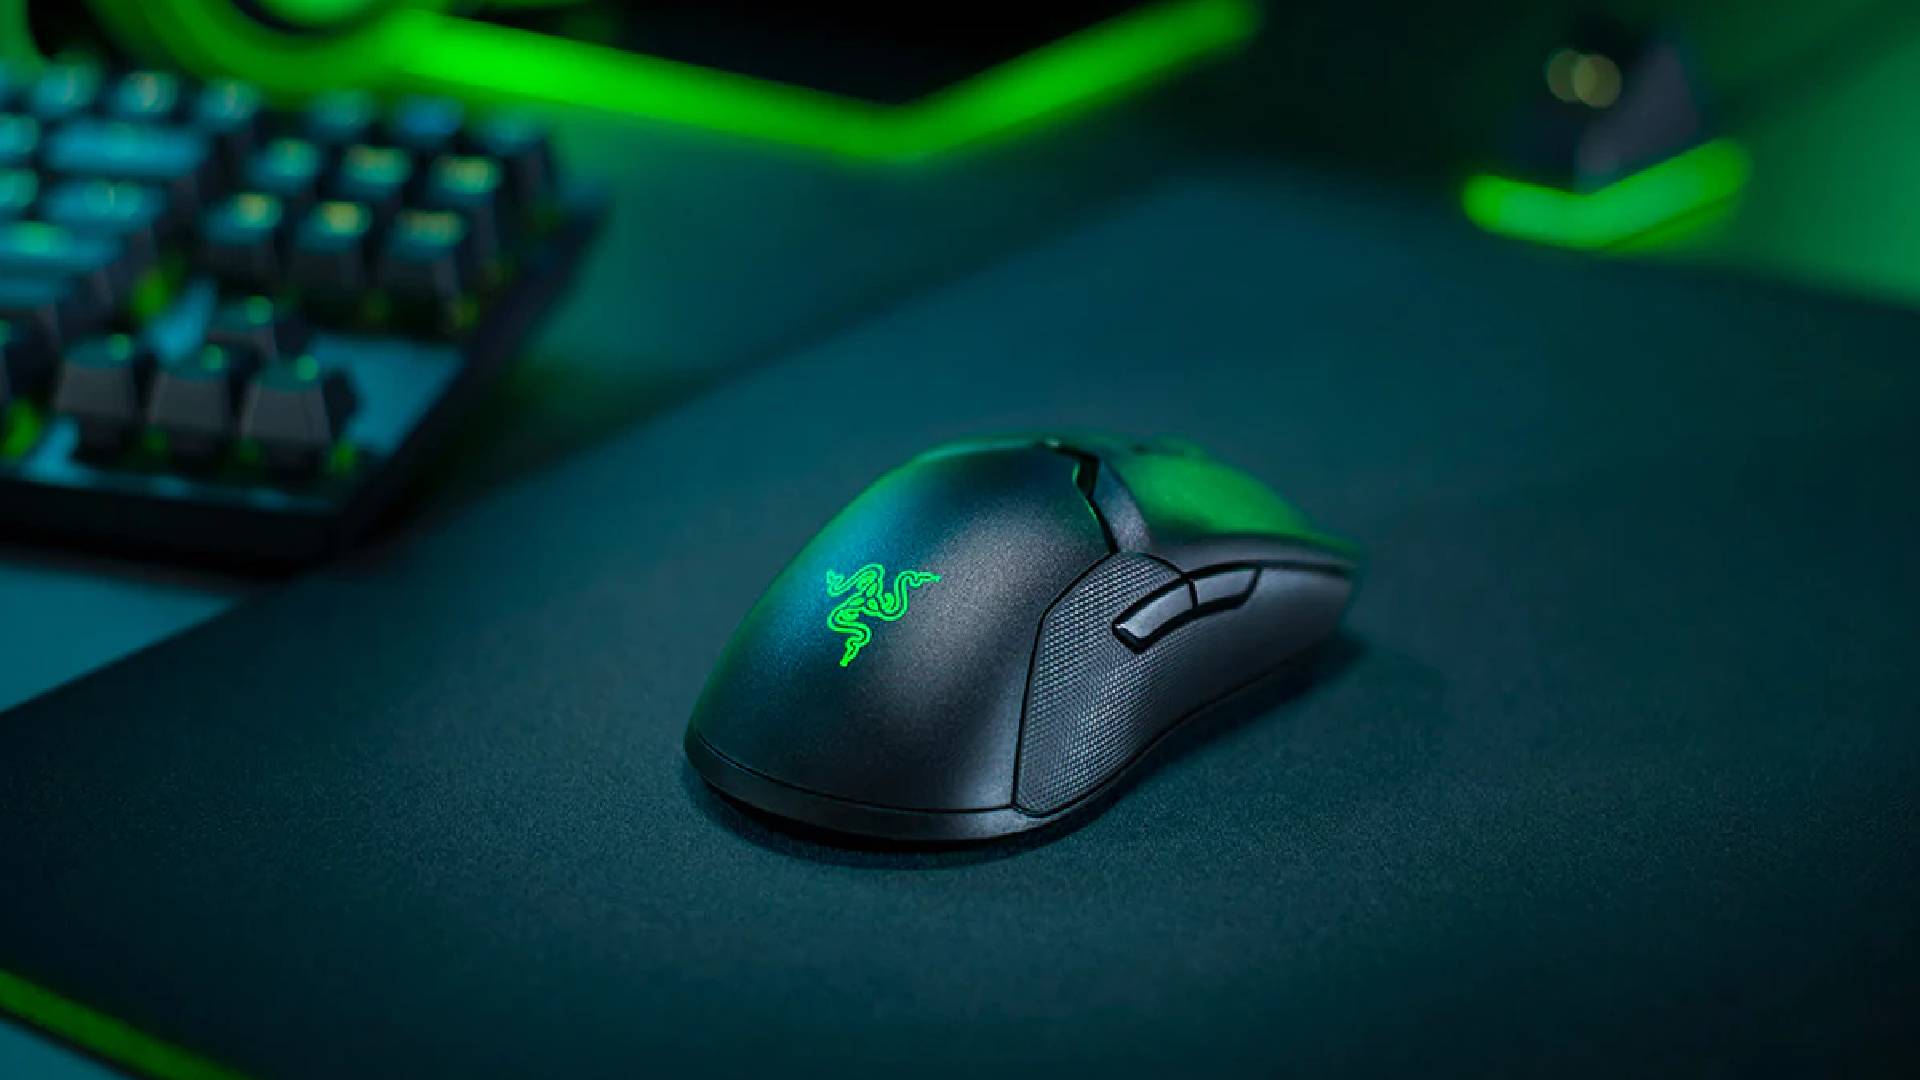 Grab 40% off this Razer wireless gaming mouse just in time for Christmas